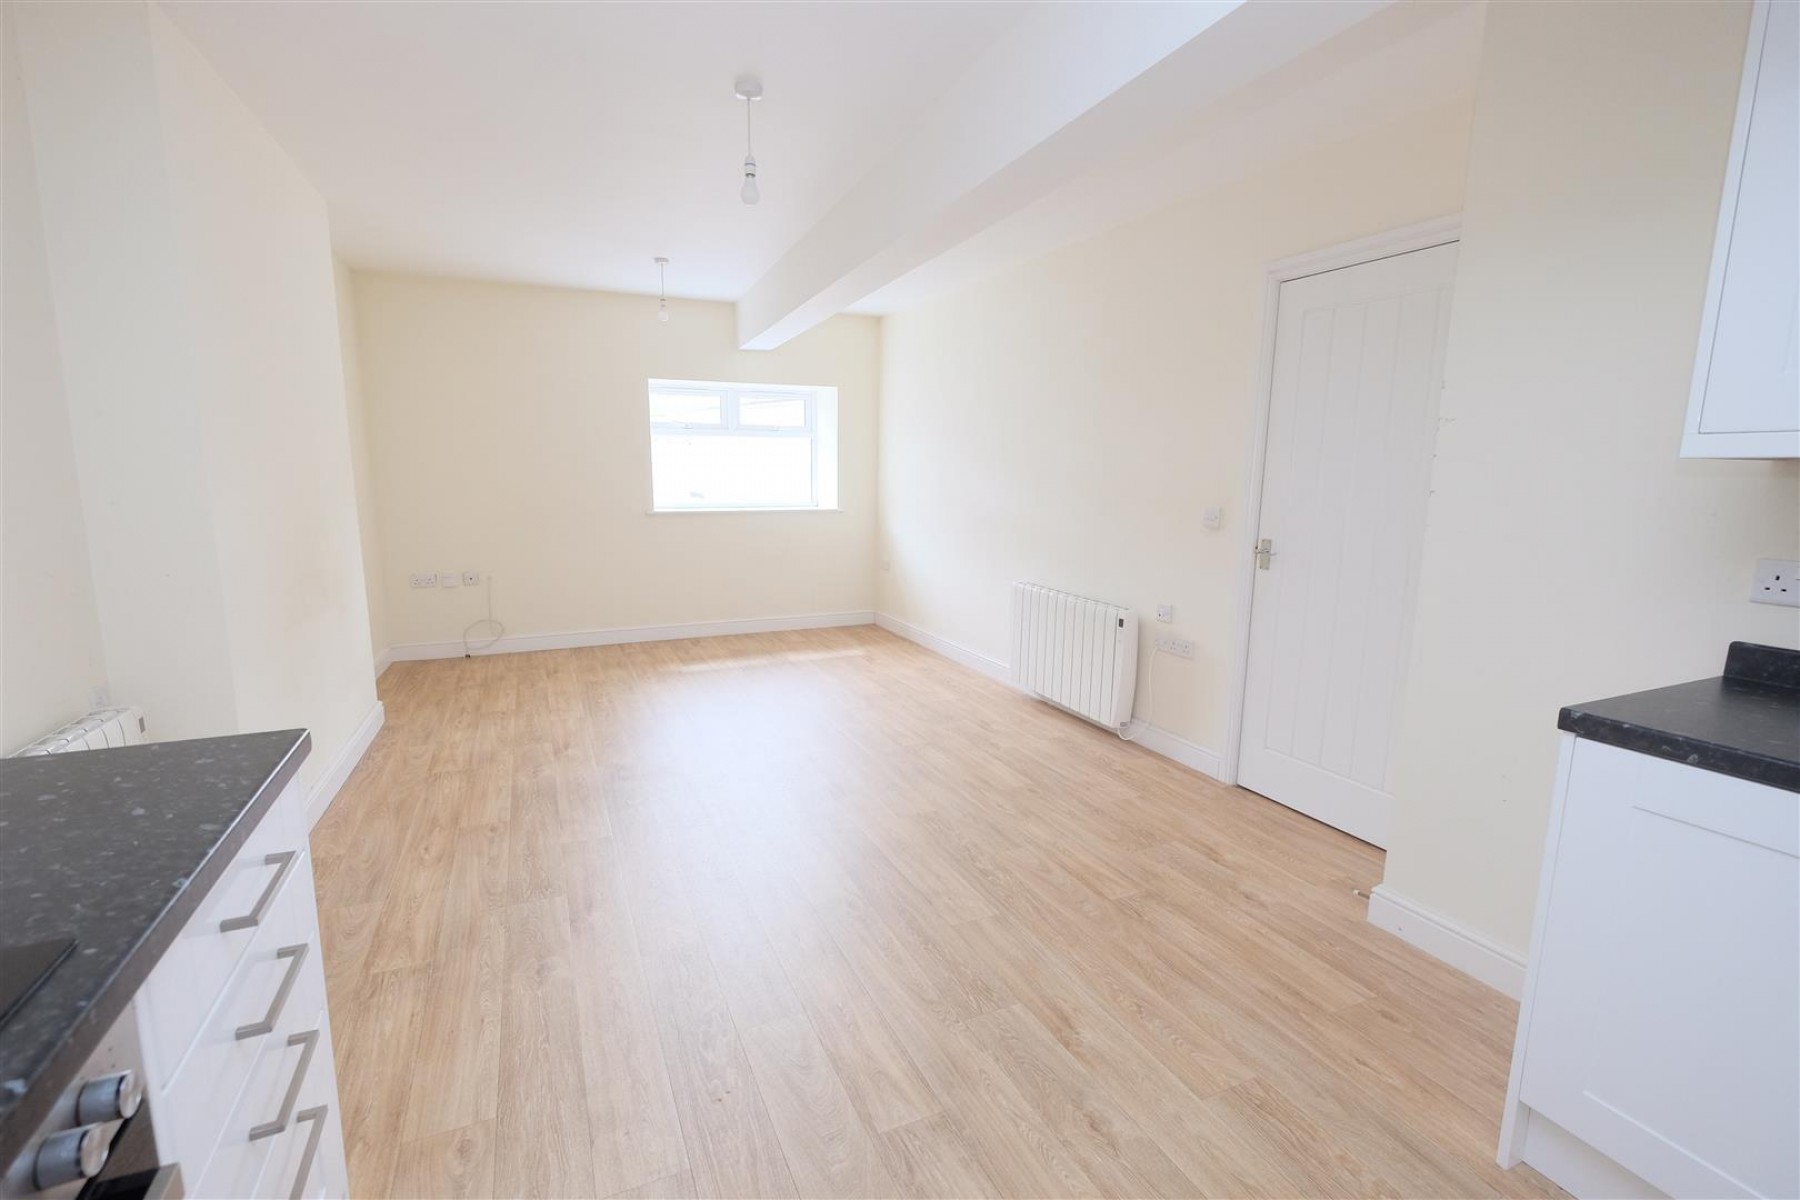 Images for TENANTED FLAT | MIDSOMER NORTON